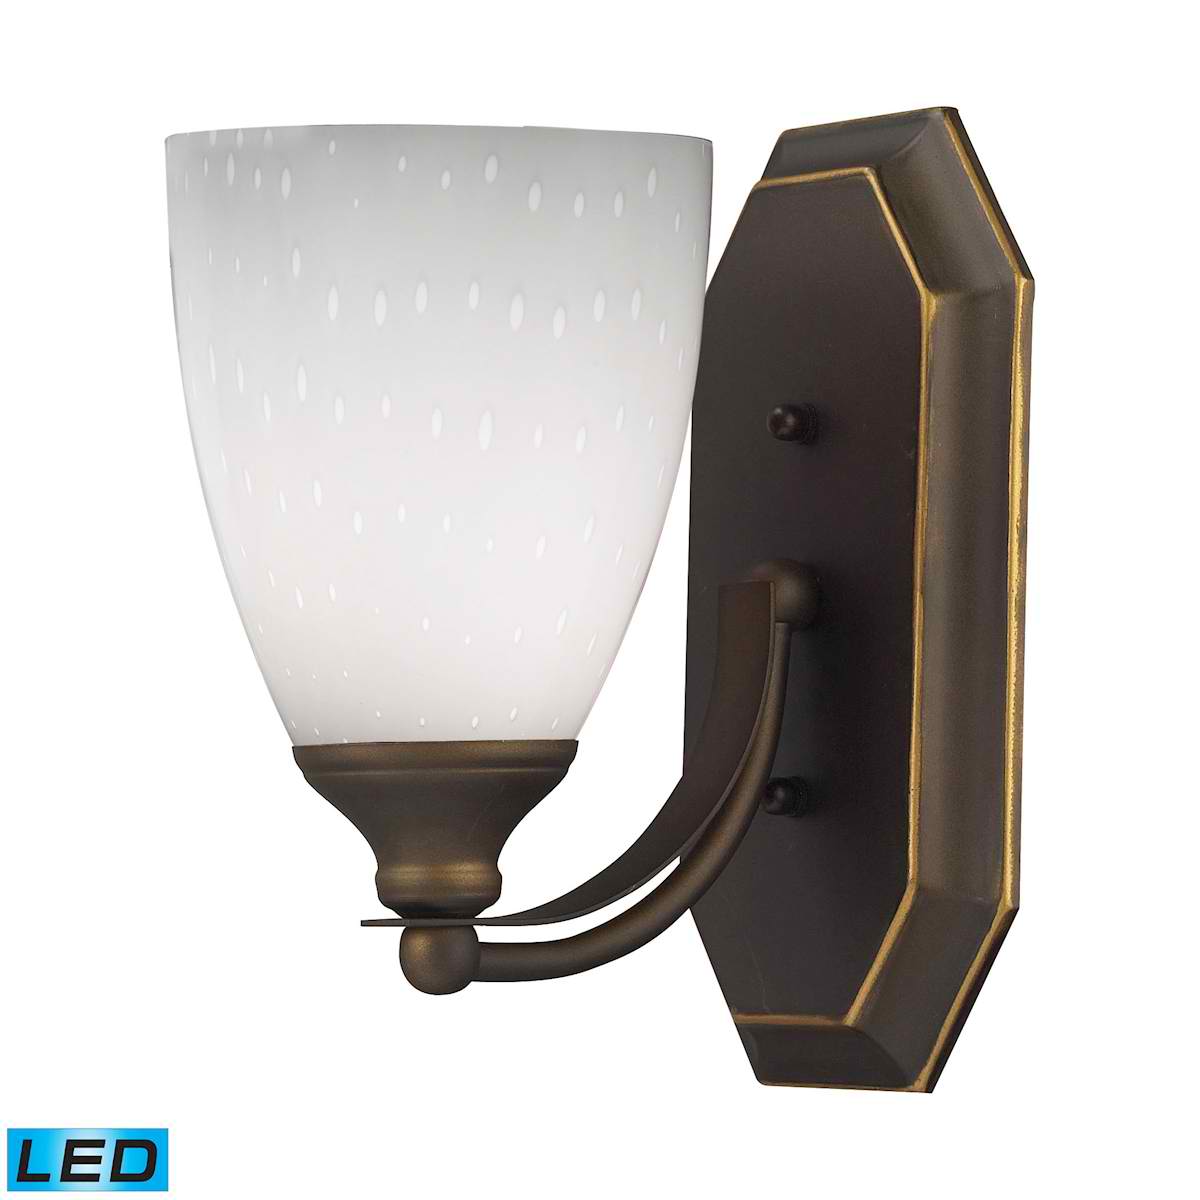 1 Light Vanity in Aged Bronze and Simply White Glass - LED Offering Up To 800 Lumens (60 Watt Equivalent)